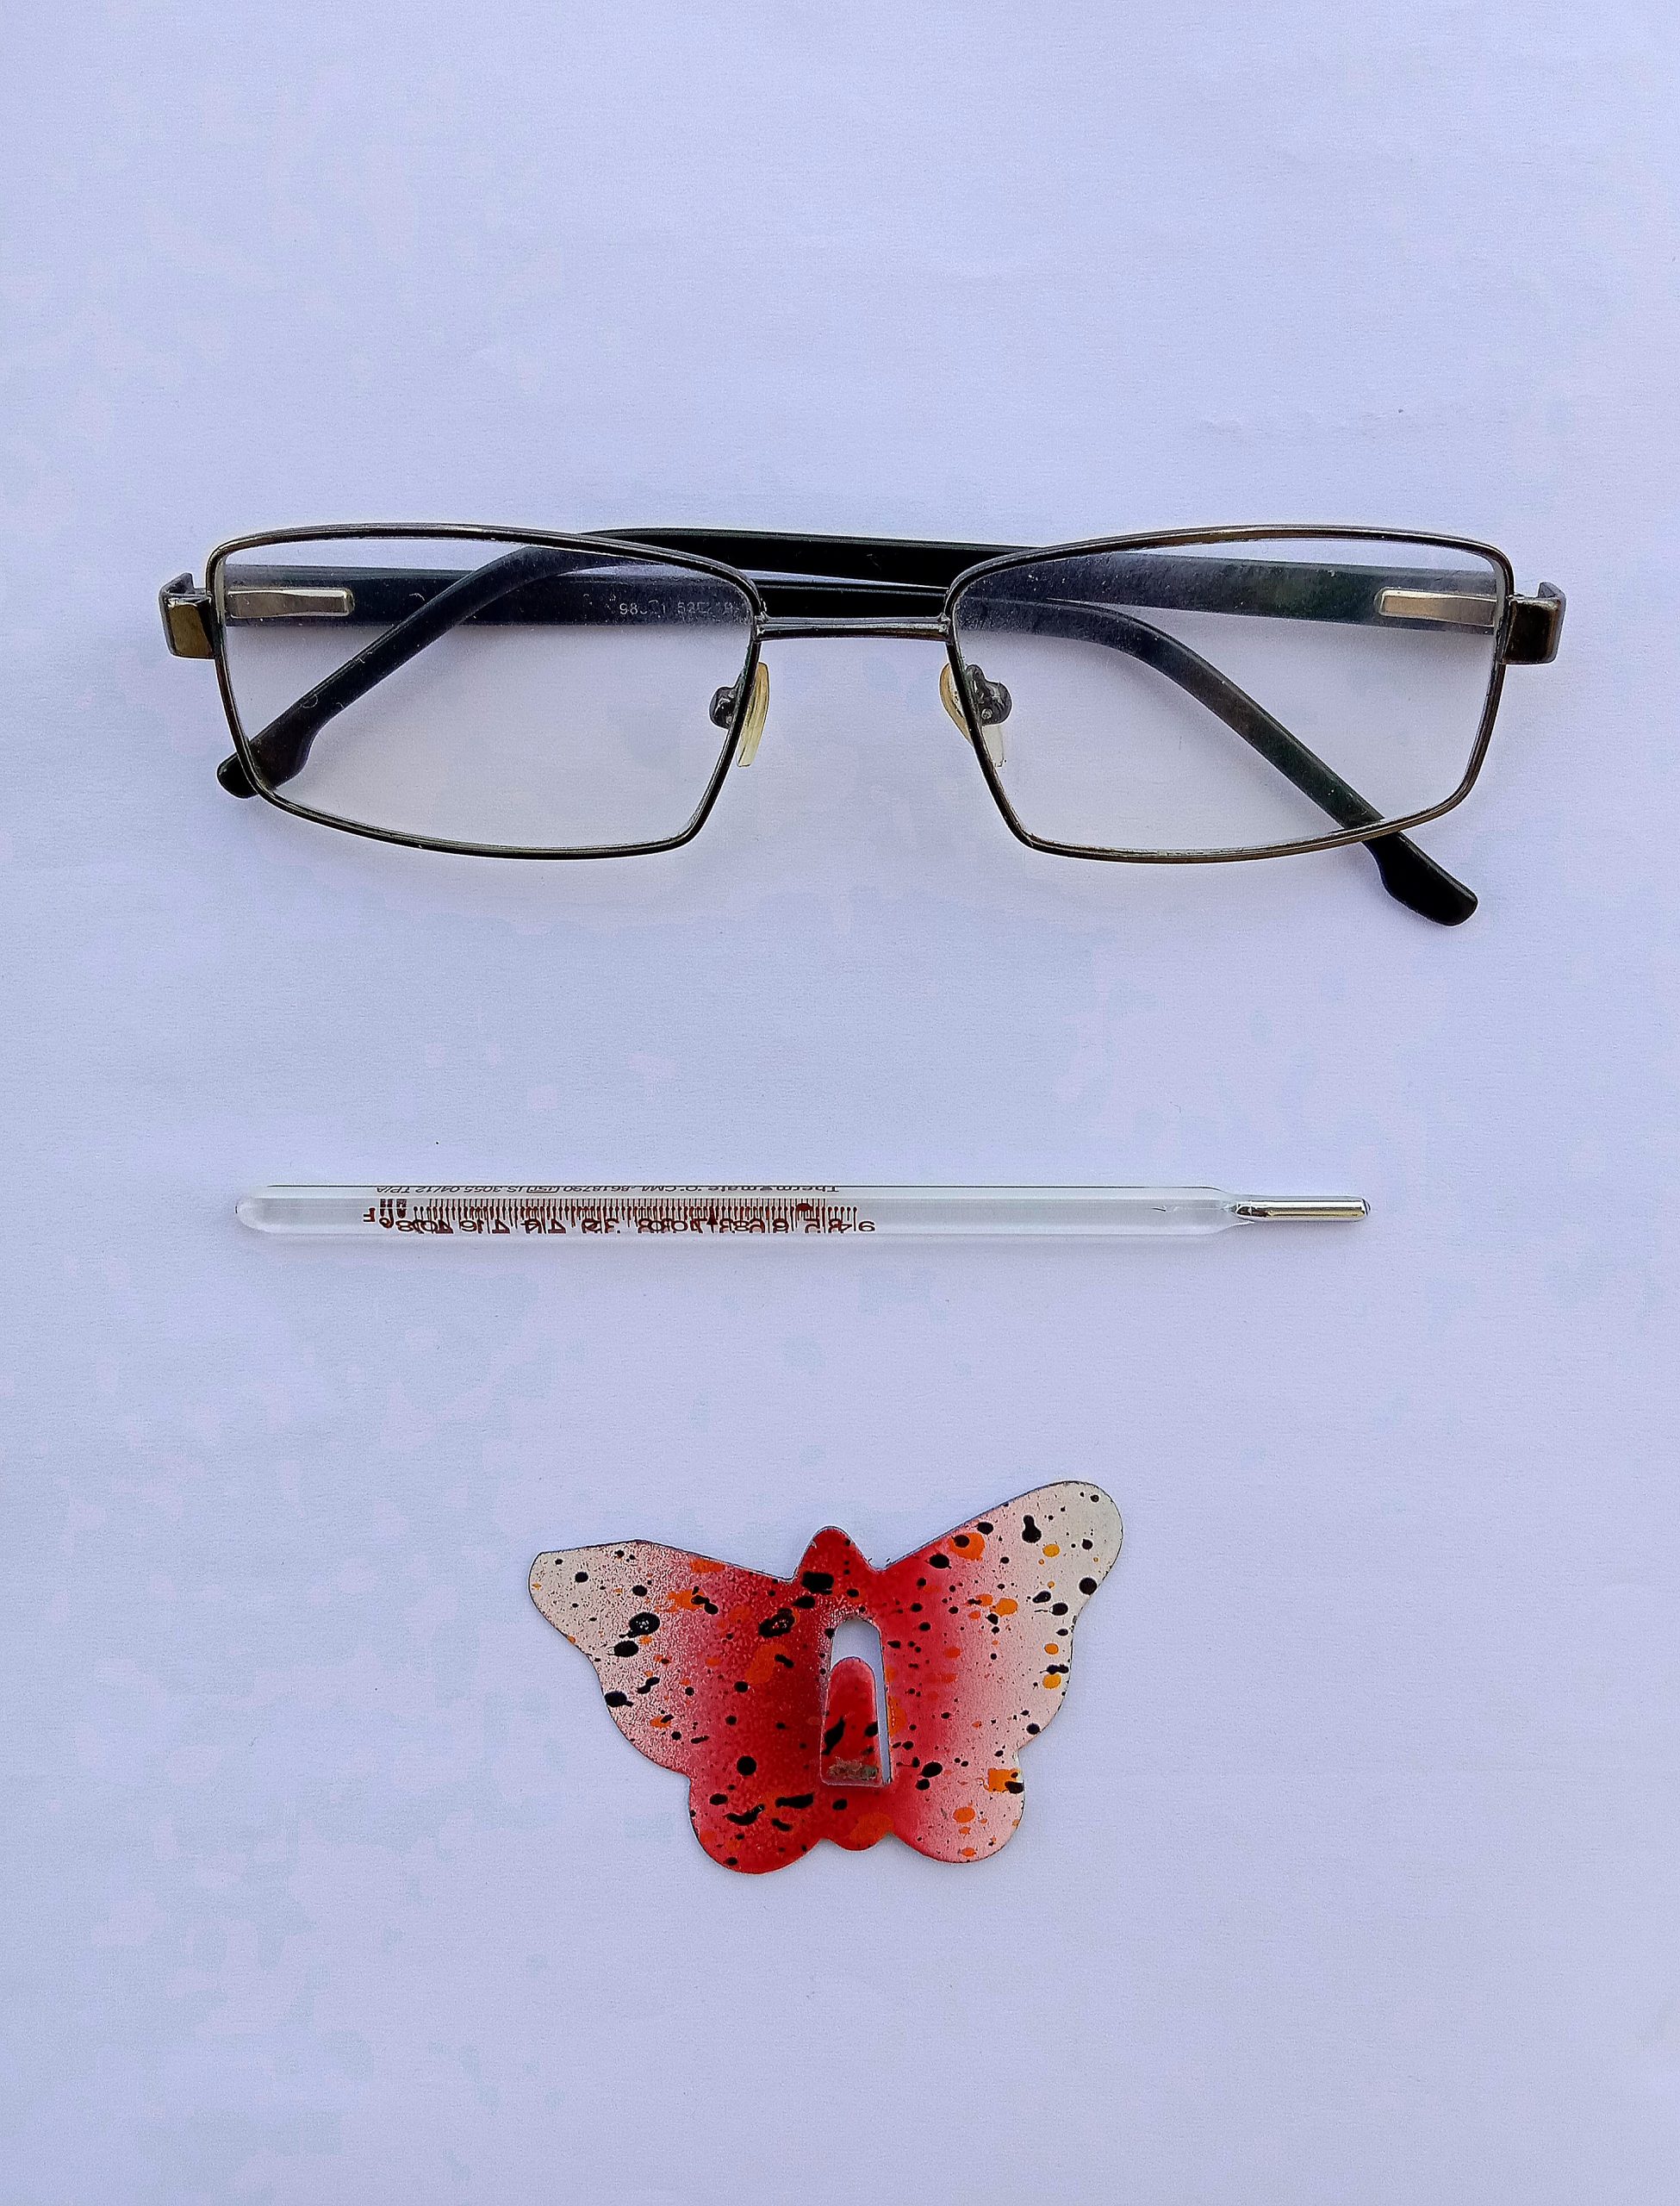 spectacles, thermometer, hook